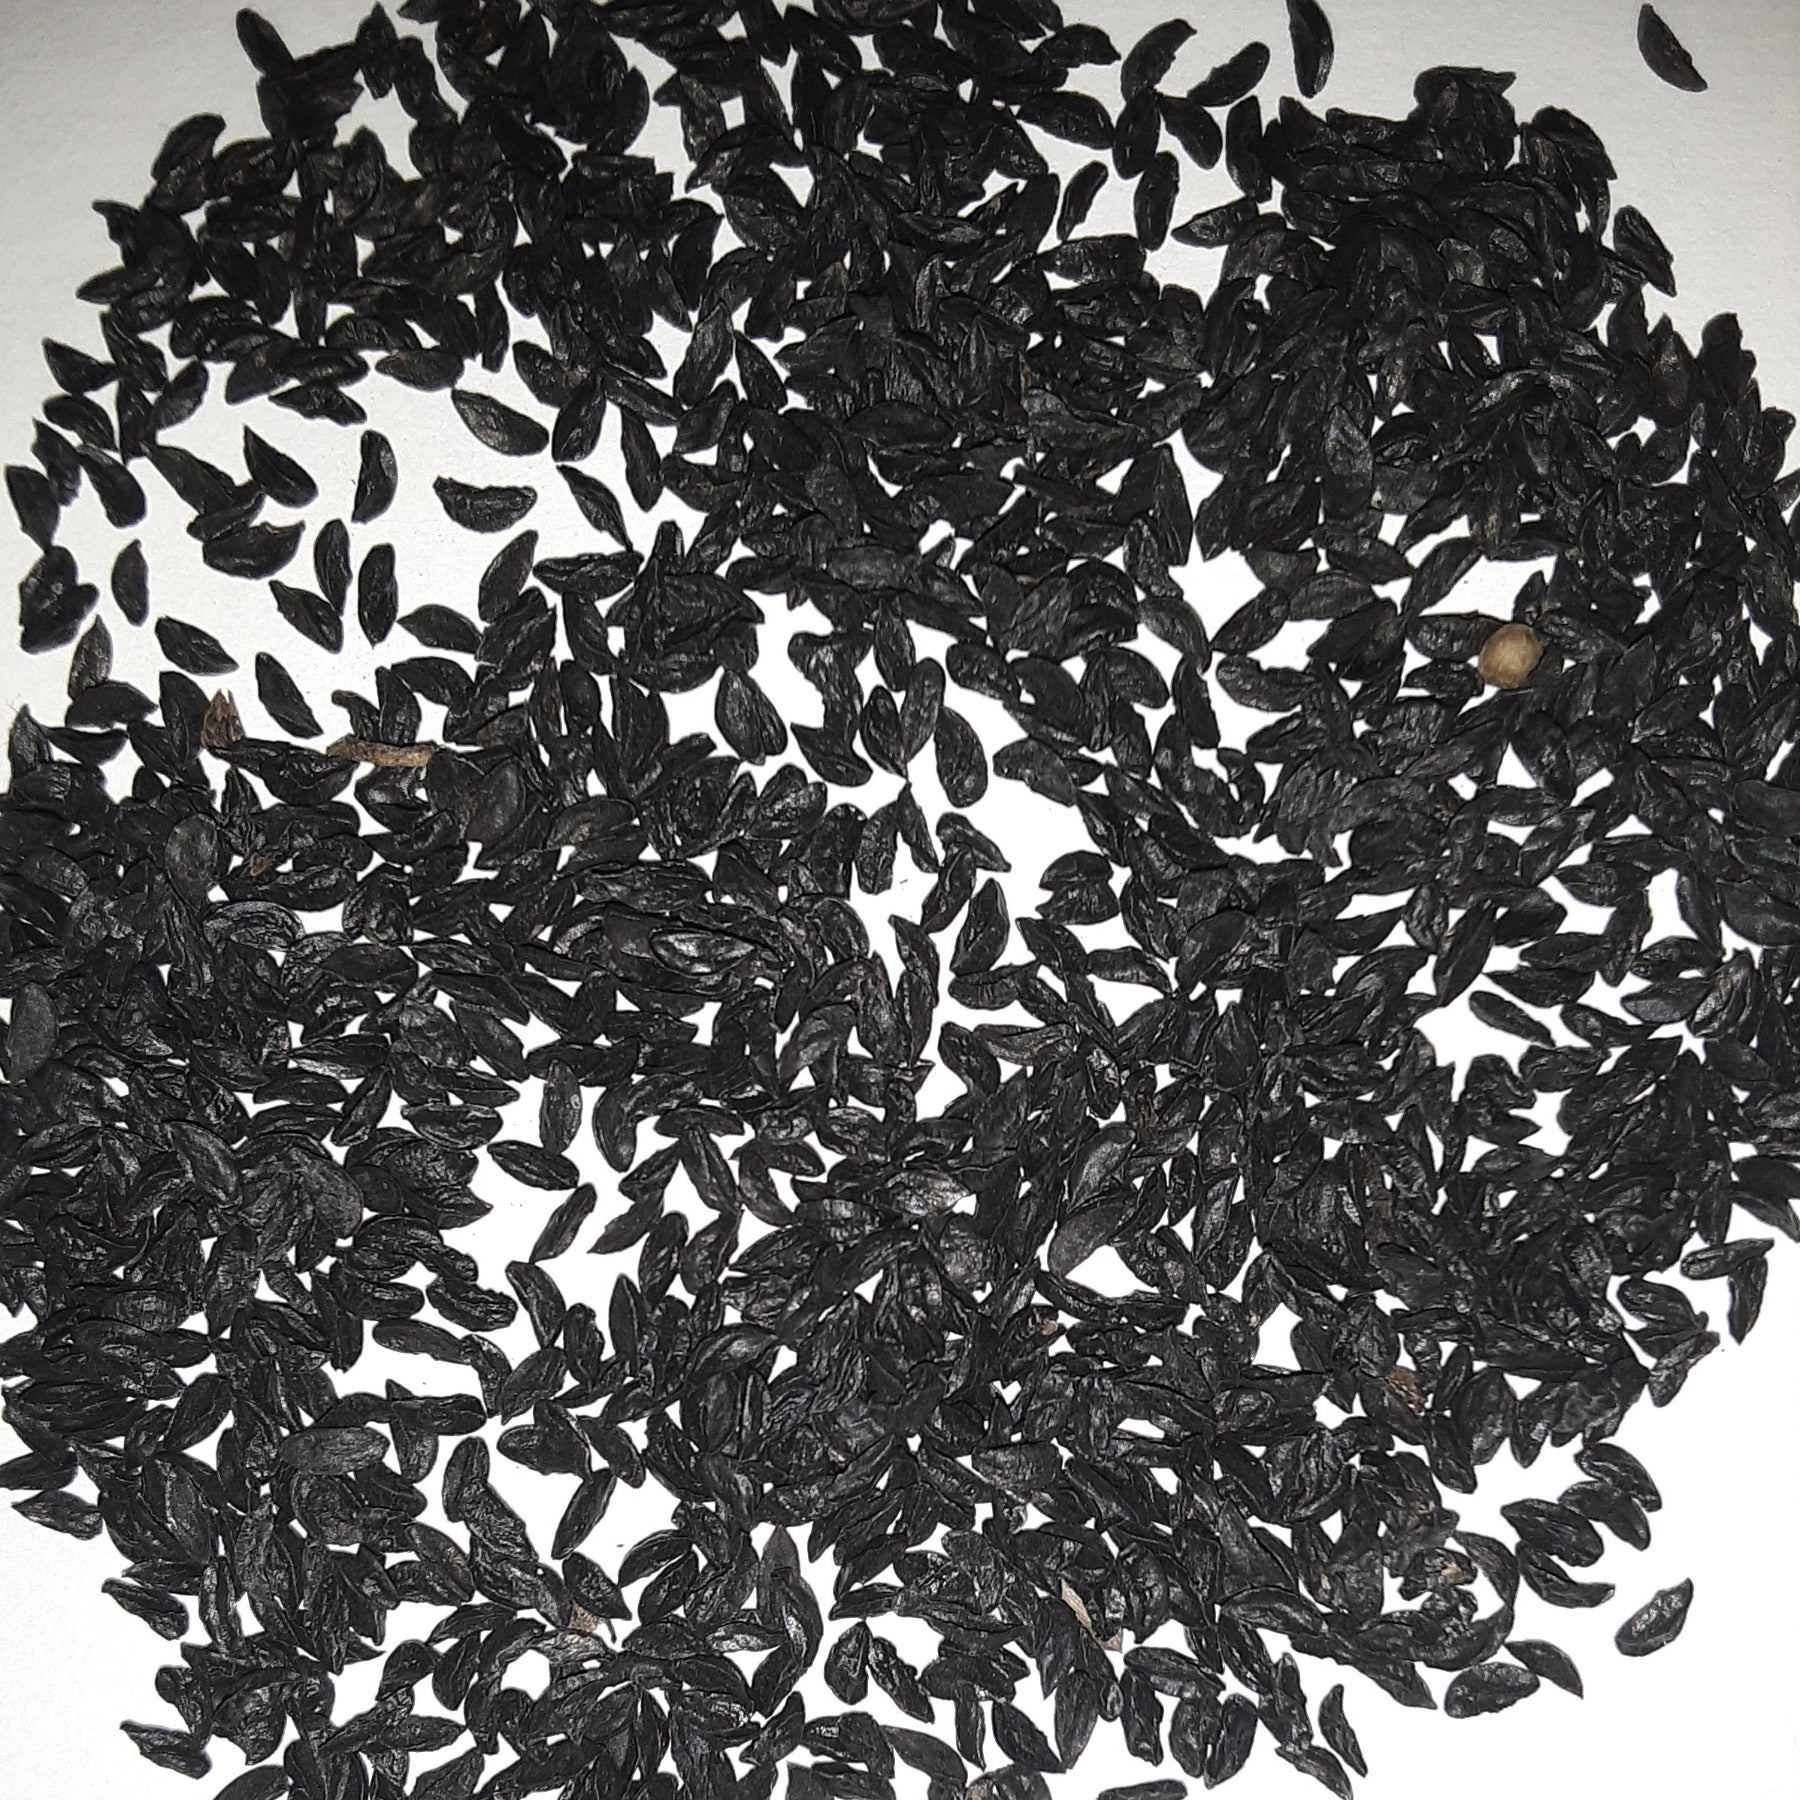 Herb, Common Chive Seeds